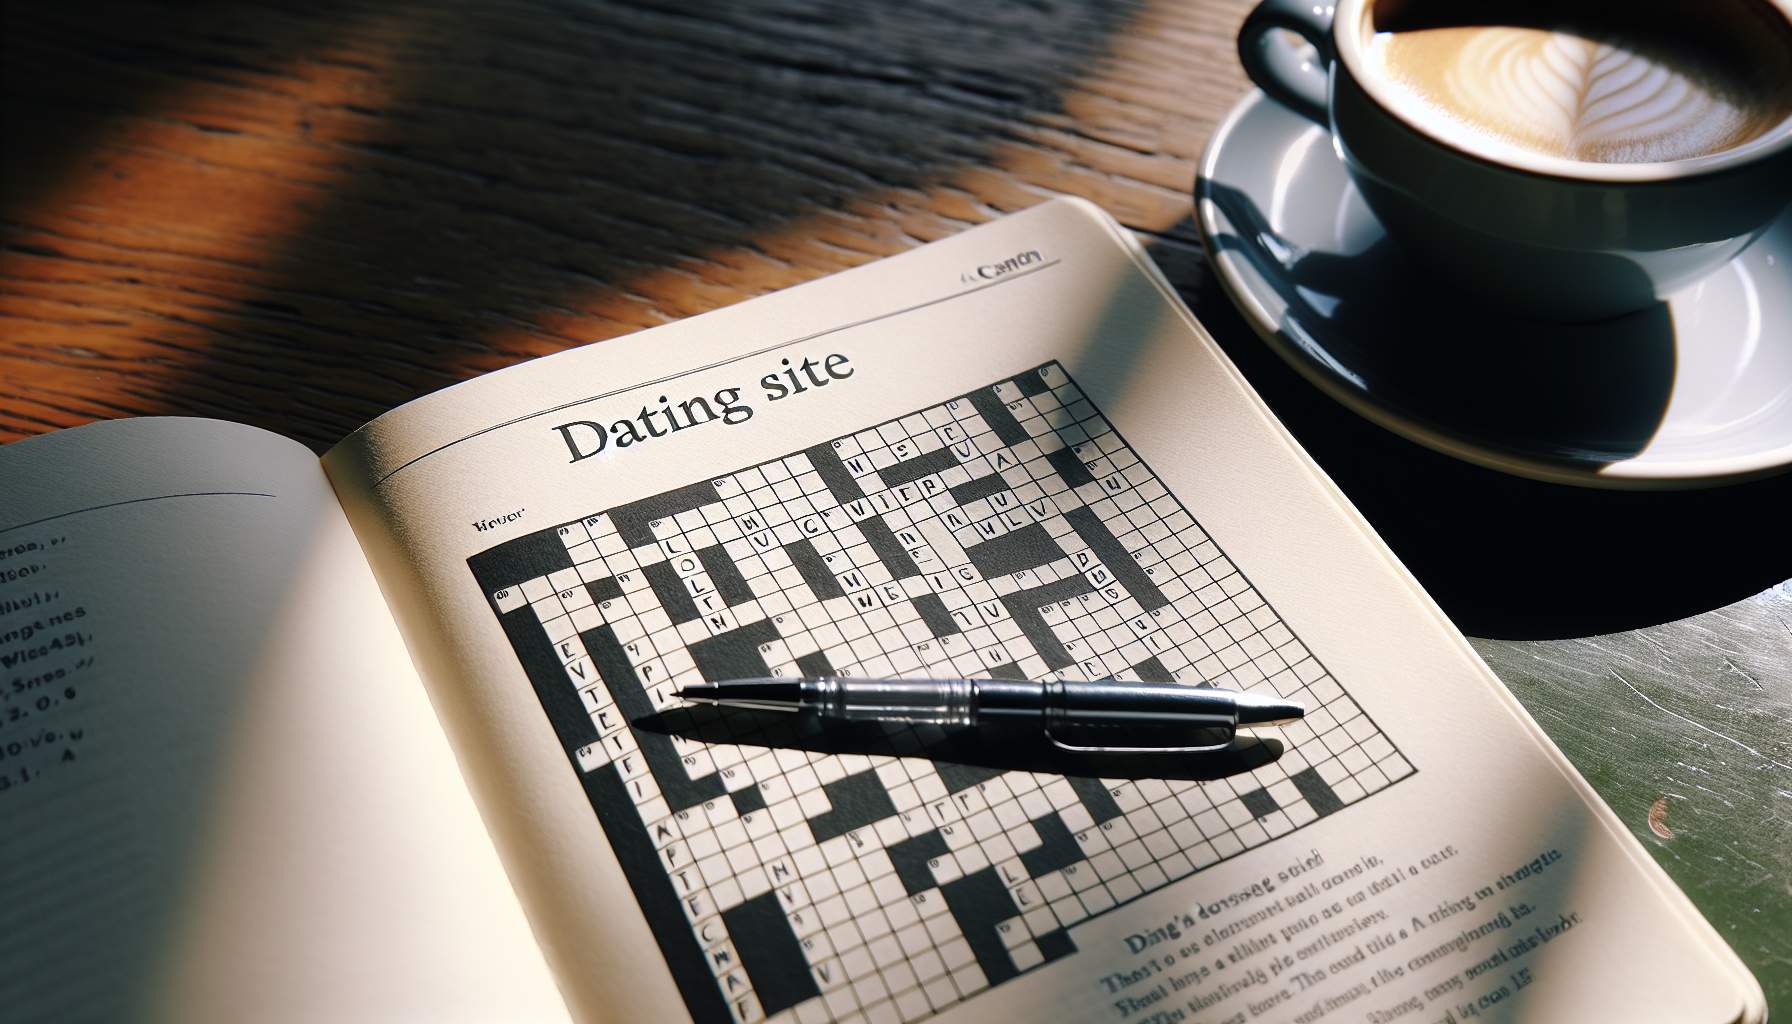 Unlock Love's Code: The Dating Site Info Clue Decoded